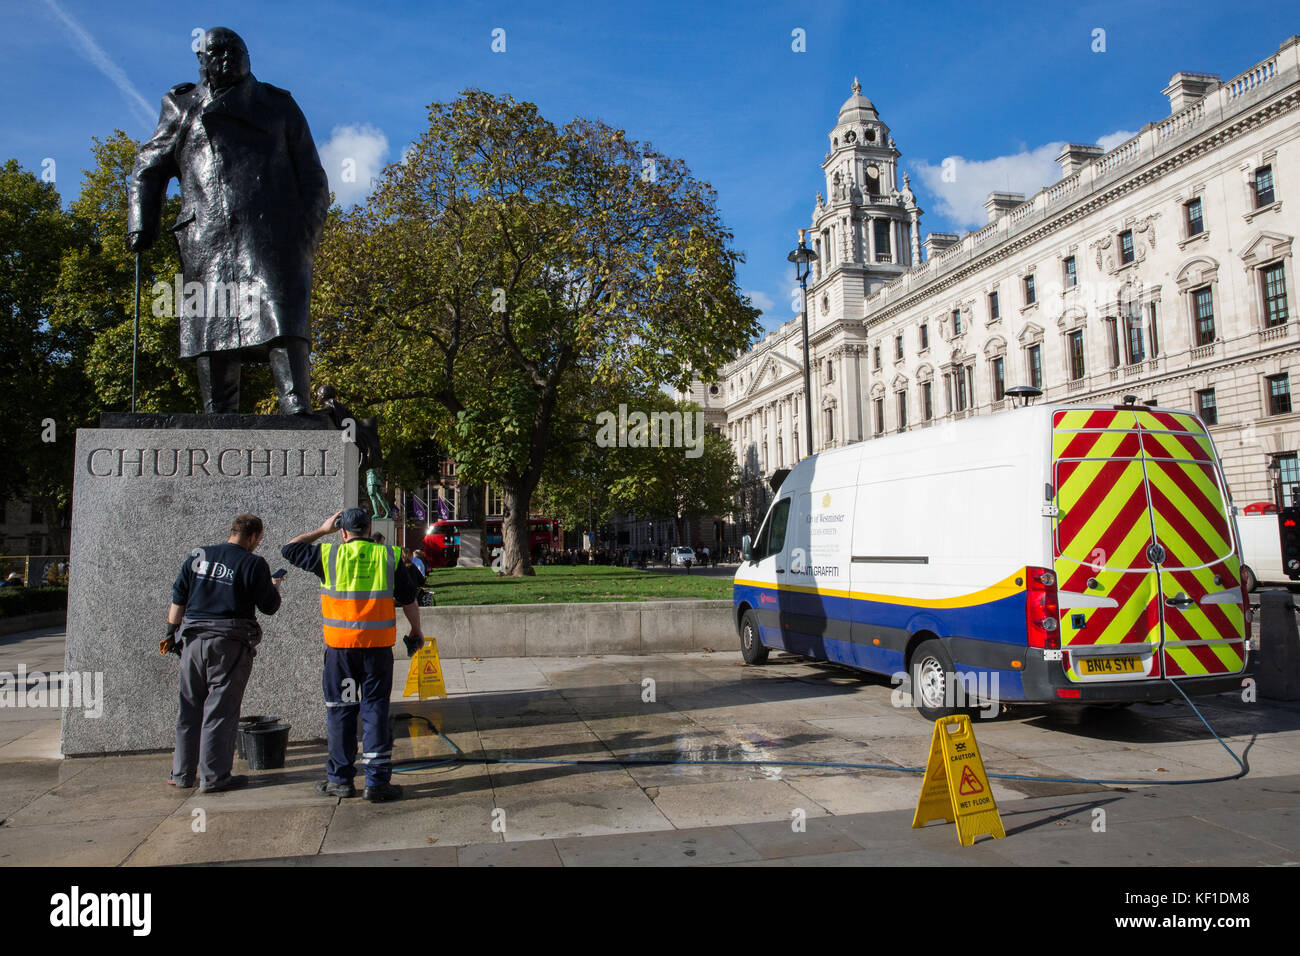 London, UK. 25th October, 2017. Employees of cleaning company Veolia use a variety of procedures to try to remove graffiti including the word 'Nazi' which appeared on 24th October on the statue of Sir Winston Churchill opposite the Palace of Westminster in Parliament Square. Police arrested a man at around 9.45pm on 24th October on suspicion of criminal damage. Credit: Mark Kerrison/Alamy Live News Stock Photo